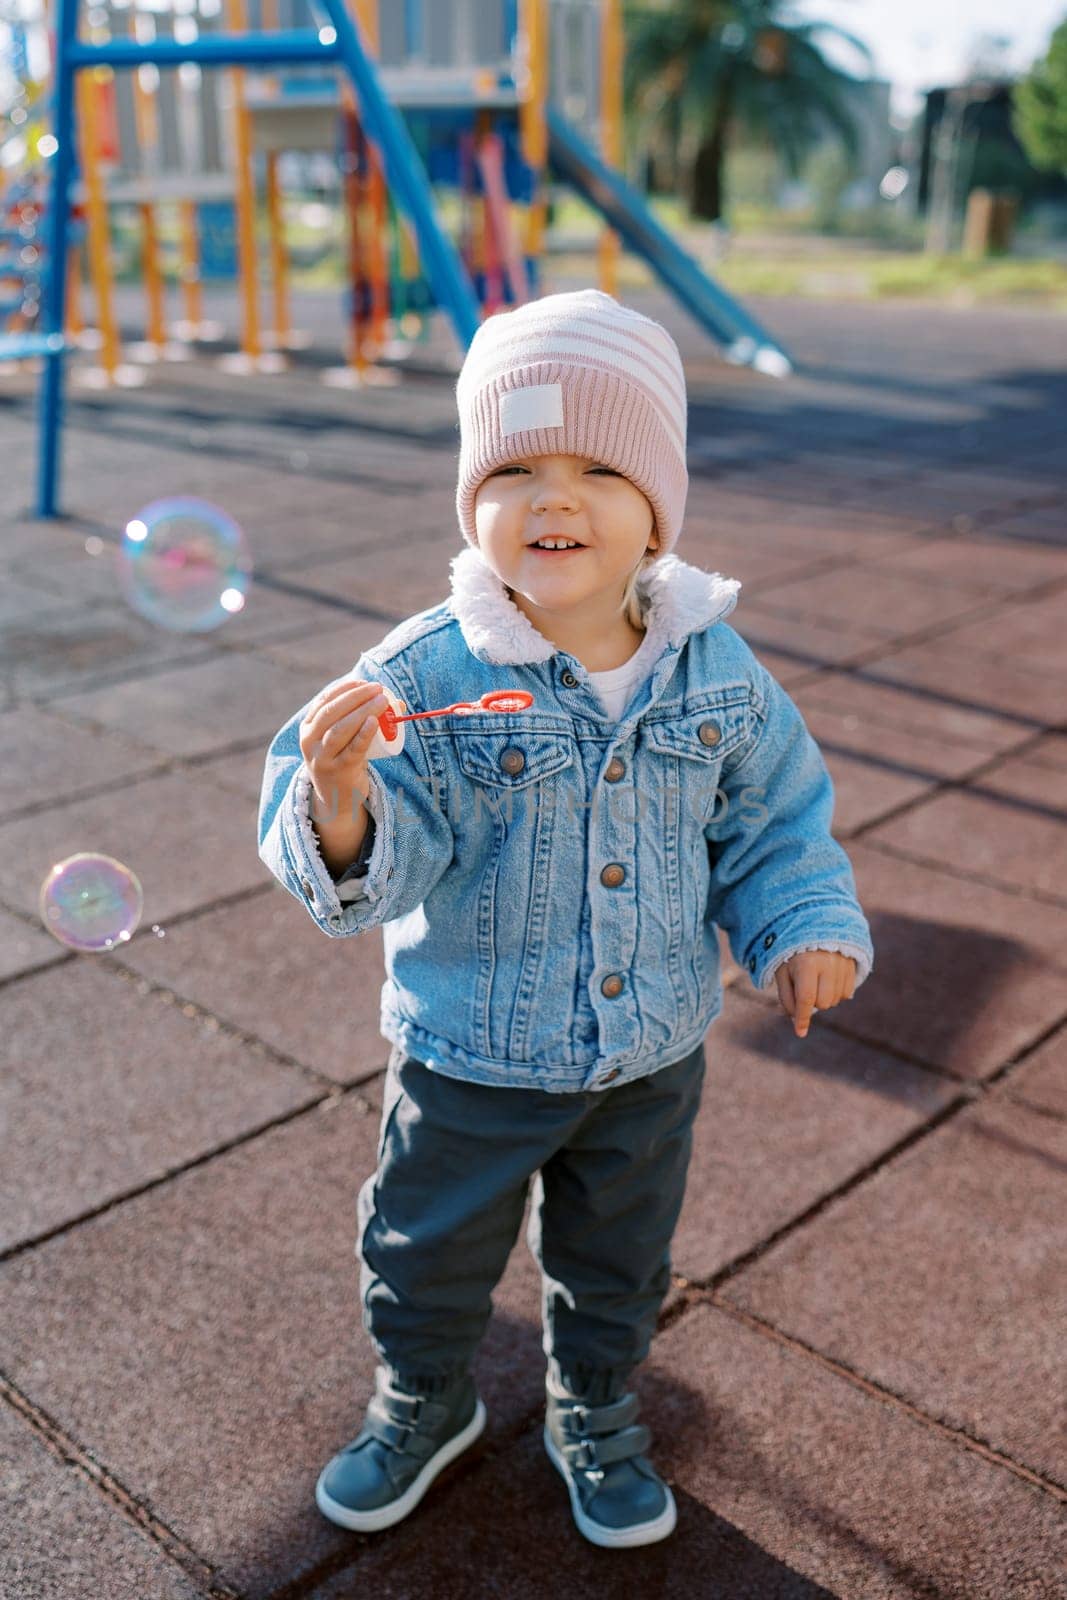 Little smiling girl blowing soap bubbles on the playground by Nadtochiy